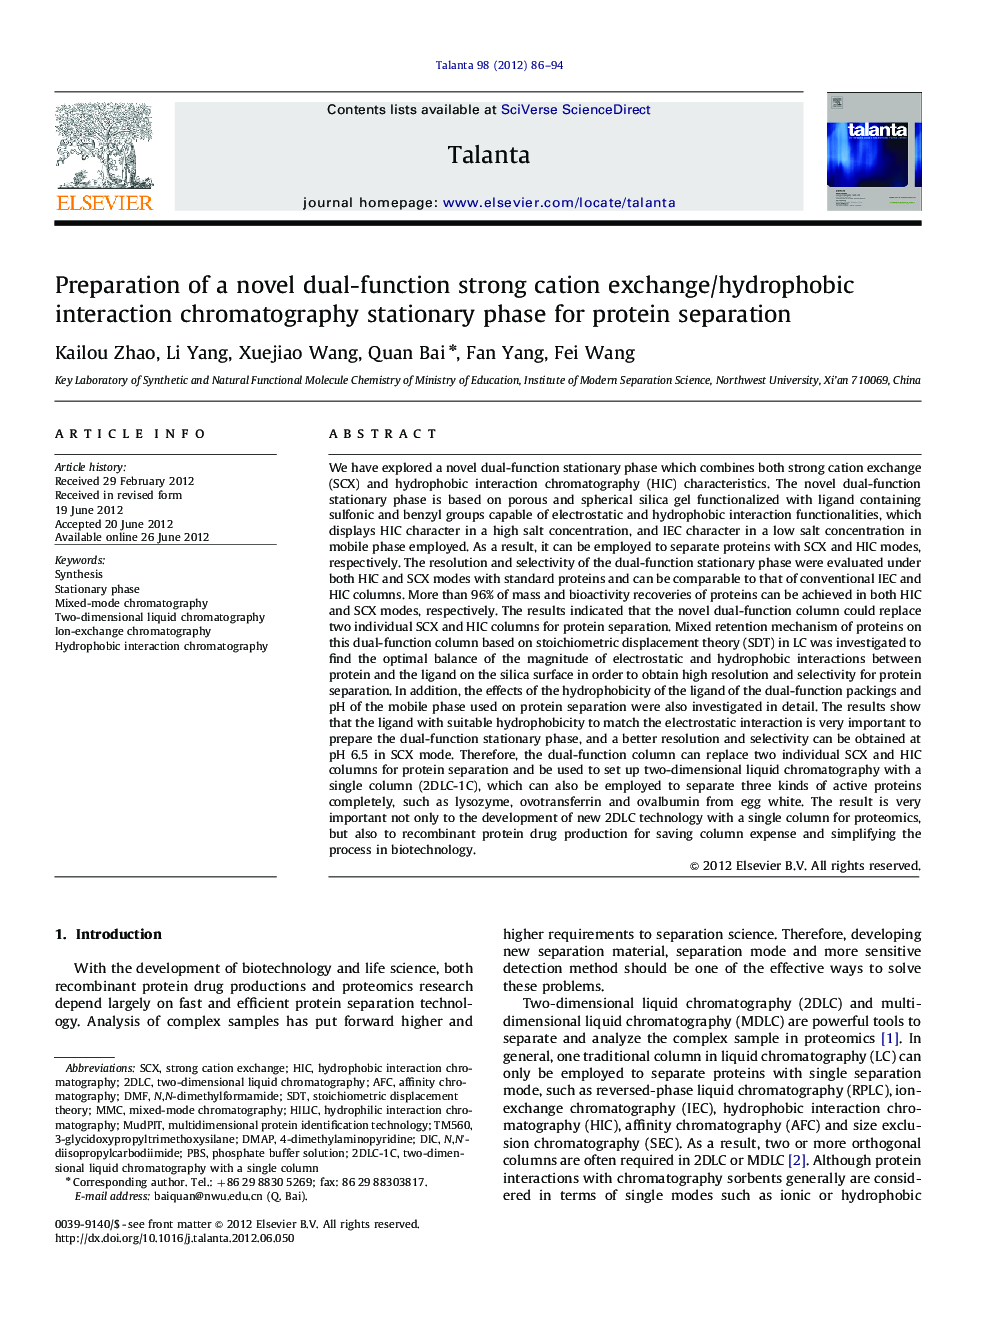 Preparation of a novel dual-function strong cation exchange/hydrophobic interaction chromatography stationary phase for protein separation